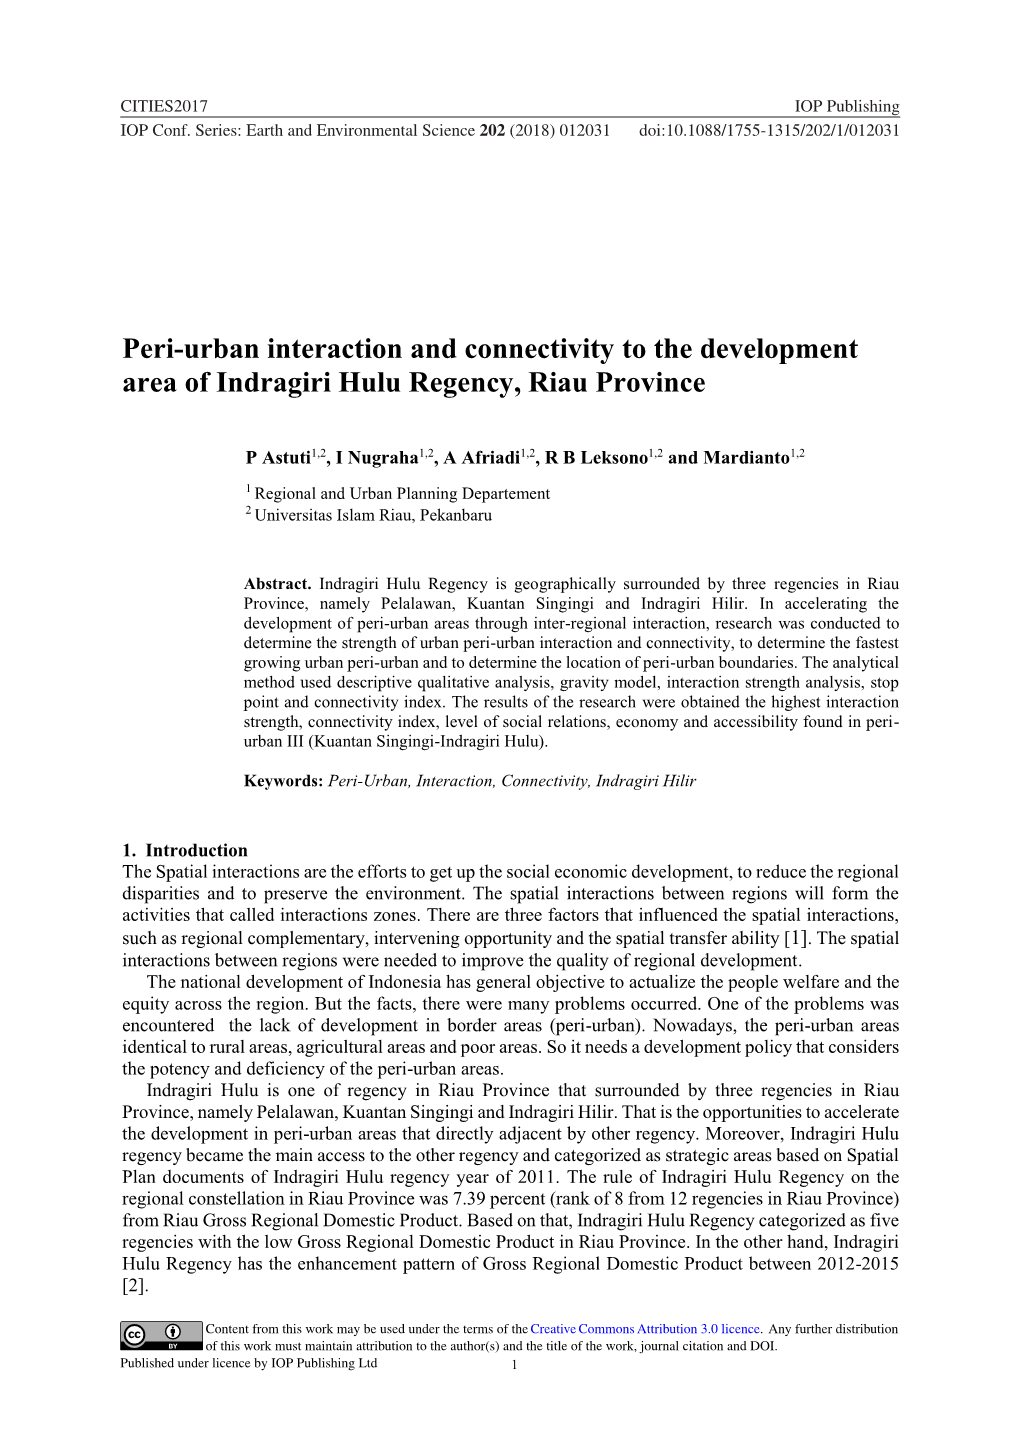 Peri-Urban Interaction and Connectivity to the Development Area of Indragiri Hulu Regency, Riau Province